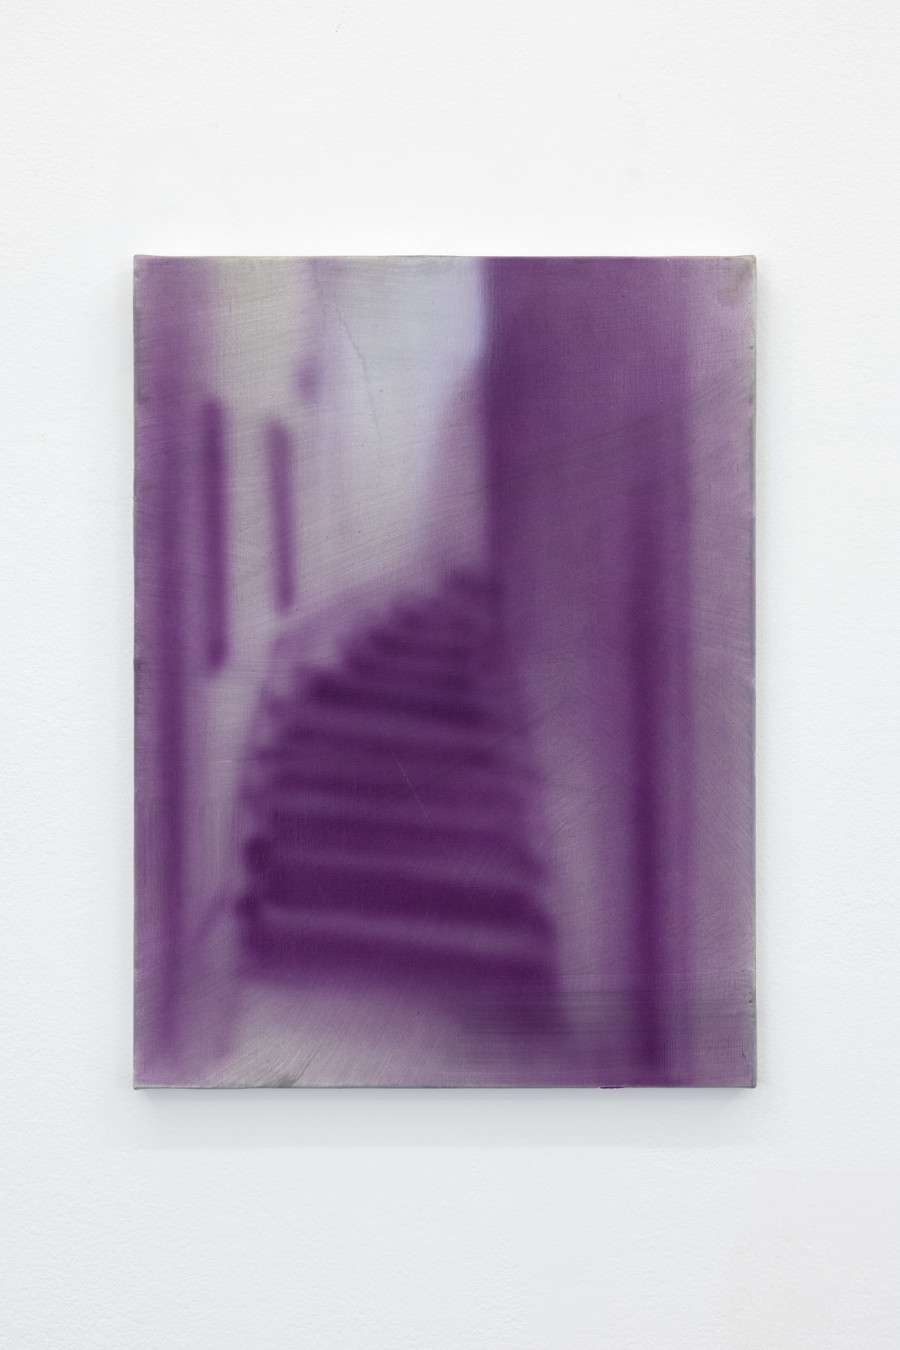 Will Sheldon, Untitled (Purple), 2022, Airbrushed acrylic on canvas, 40.5 × 30.5 cm. Courtesy: Weiss Falk and the Artist. Photo: Gina Folly